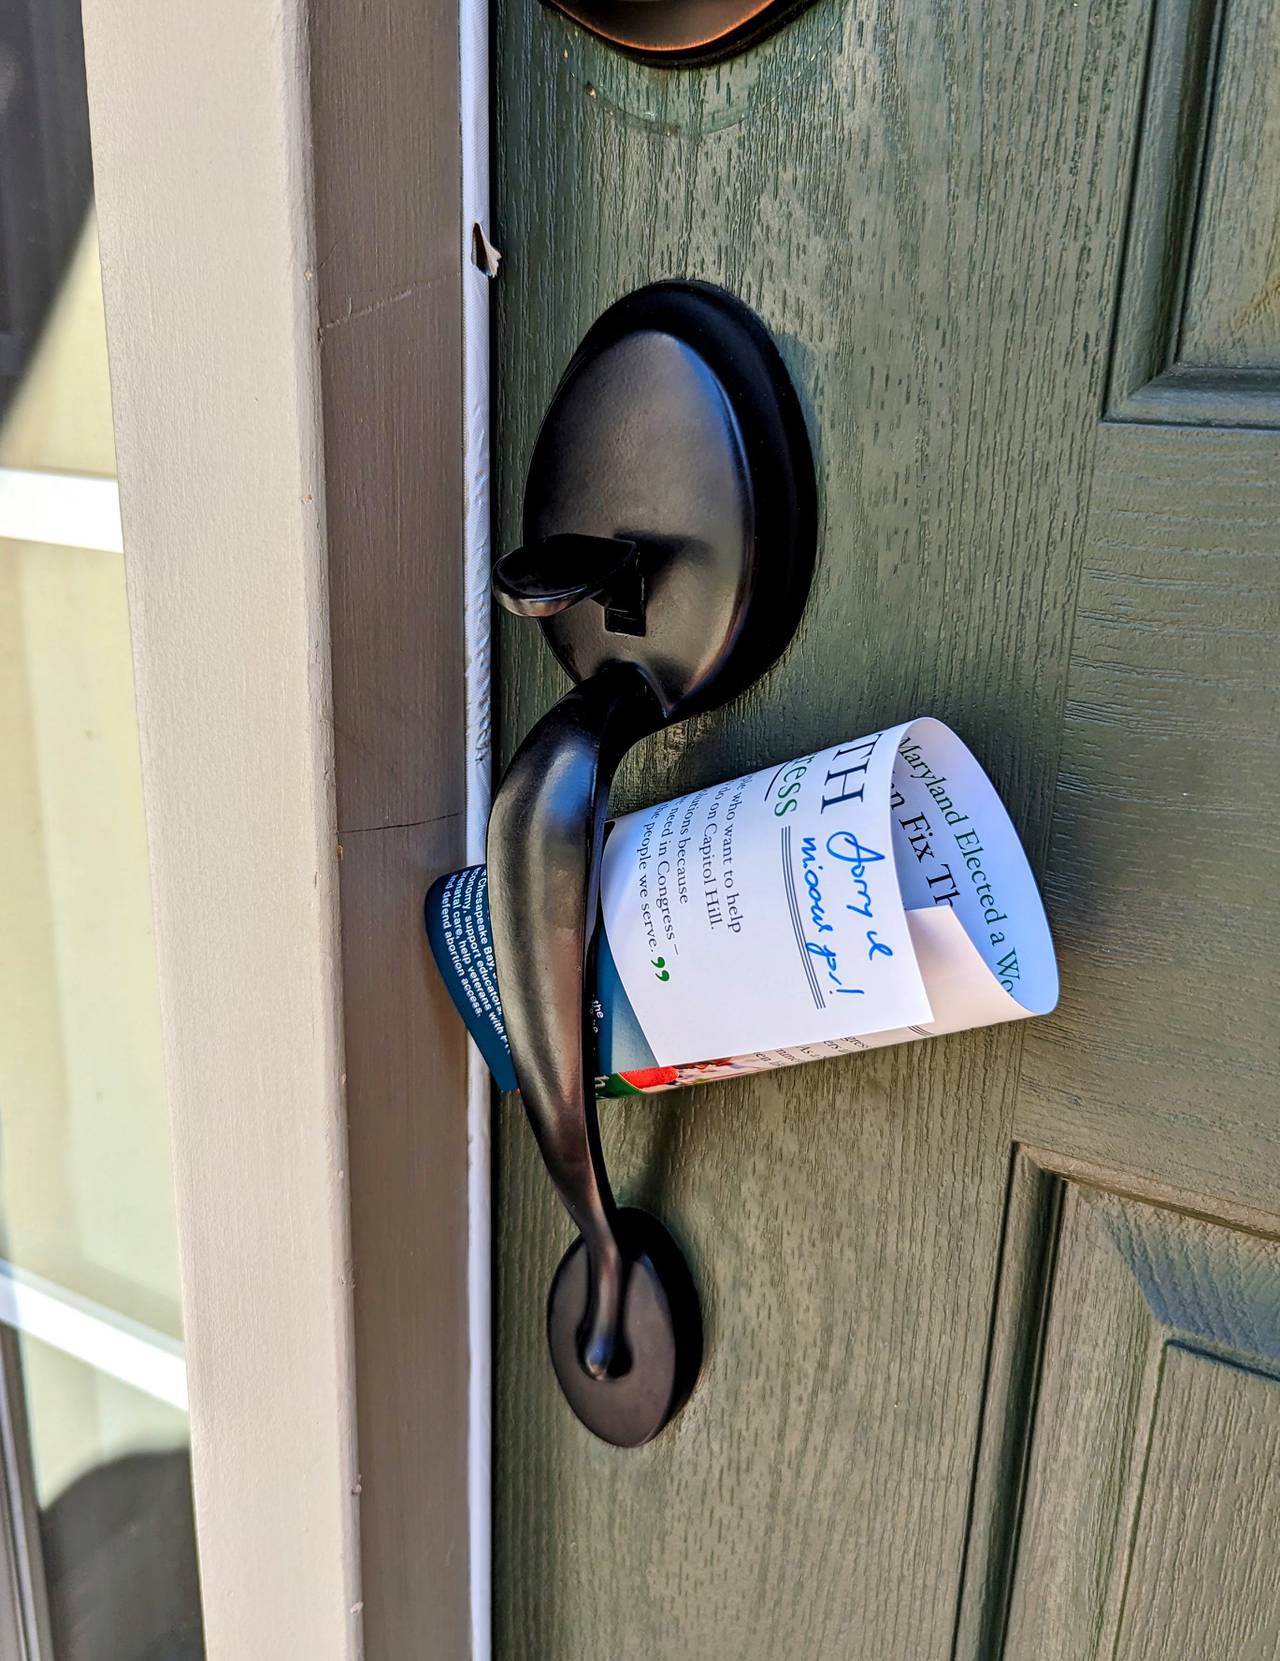 State Sen. Sarah Elfreth, one of almost 20 Democratic candidates for Congress in the vacant 3rd District, said she has knocked on 10,000 doors on weekends since announcing her campaign. She leaves campaign literature when no one  is home.